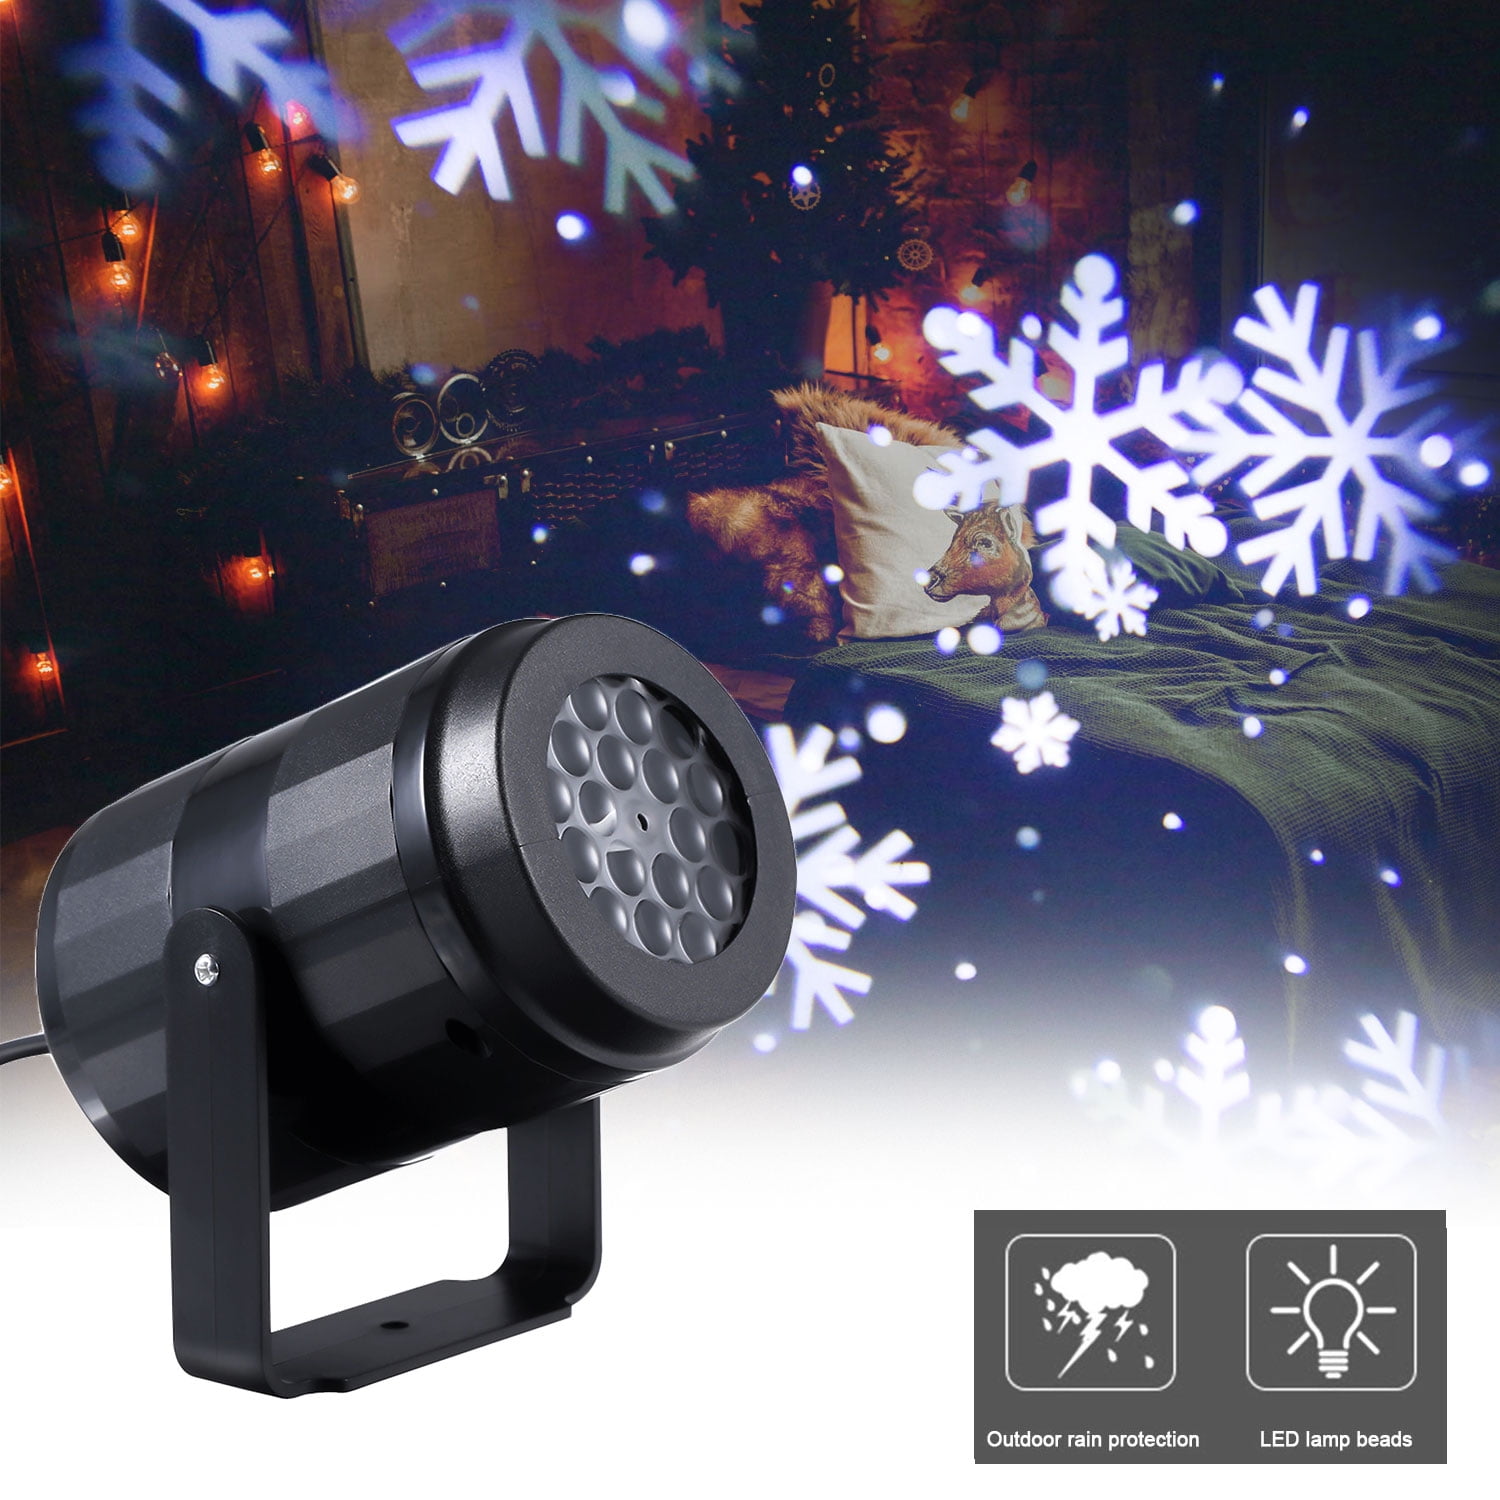 ！2020 New！ Christmas Projector Light LED Laser Landscape Outdoor Xmas Lamp hot! 